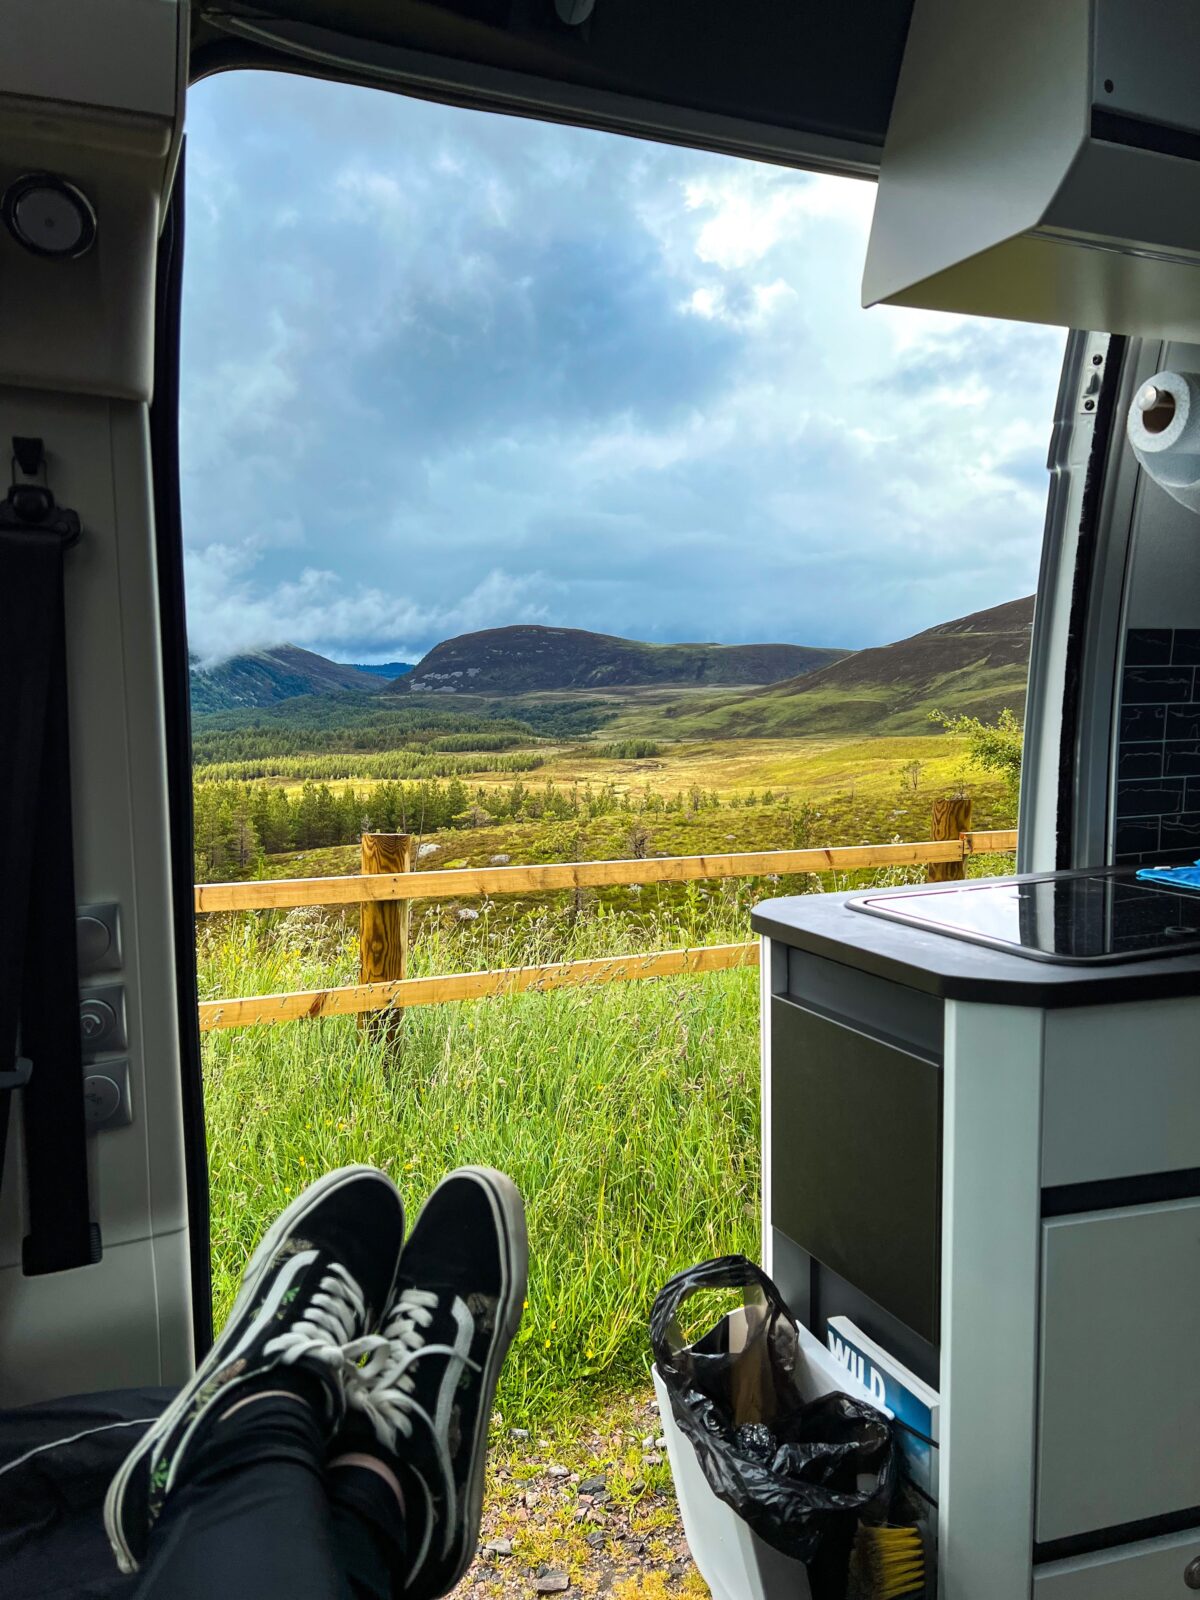 Motor Home View, Credit Amy Henderson